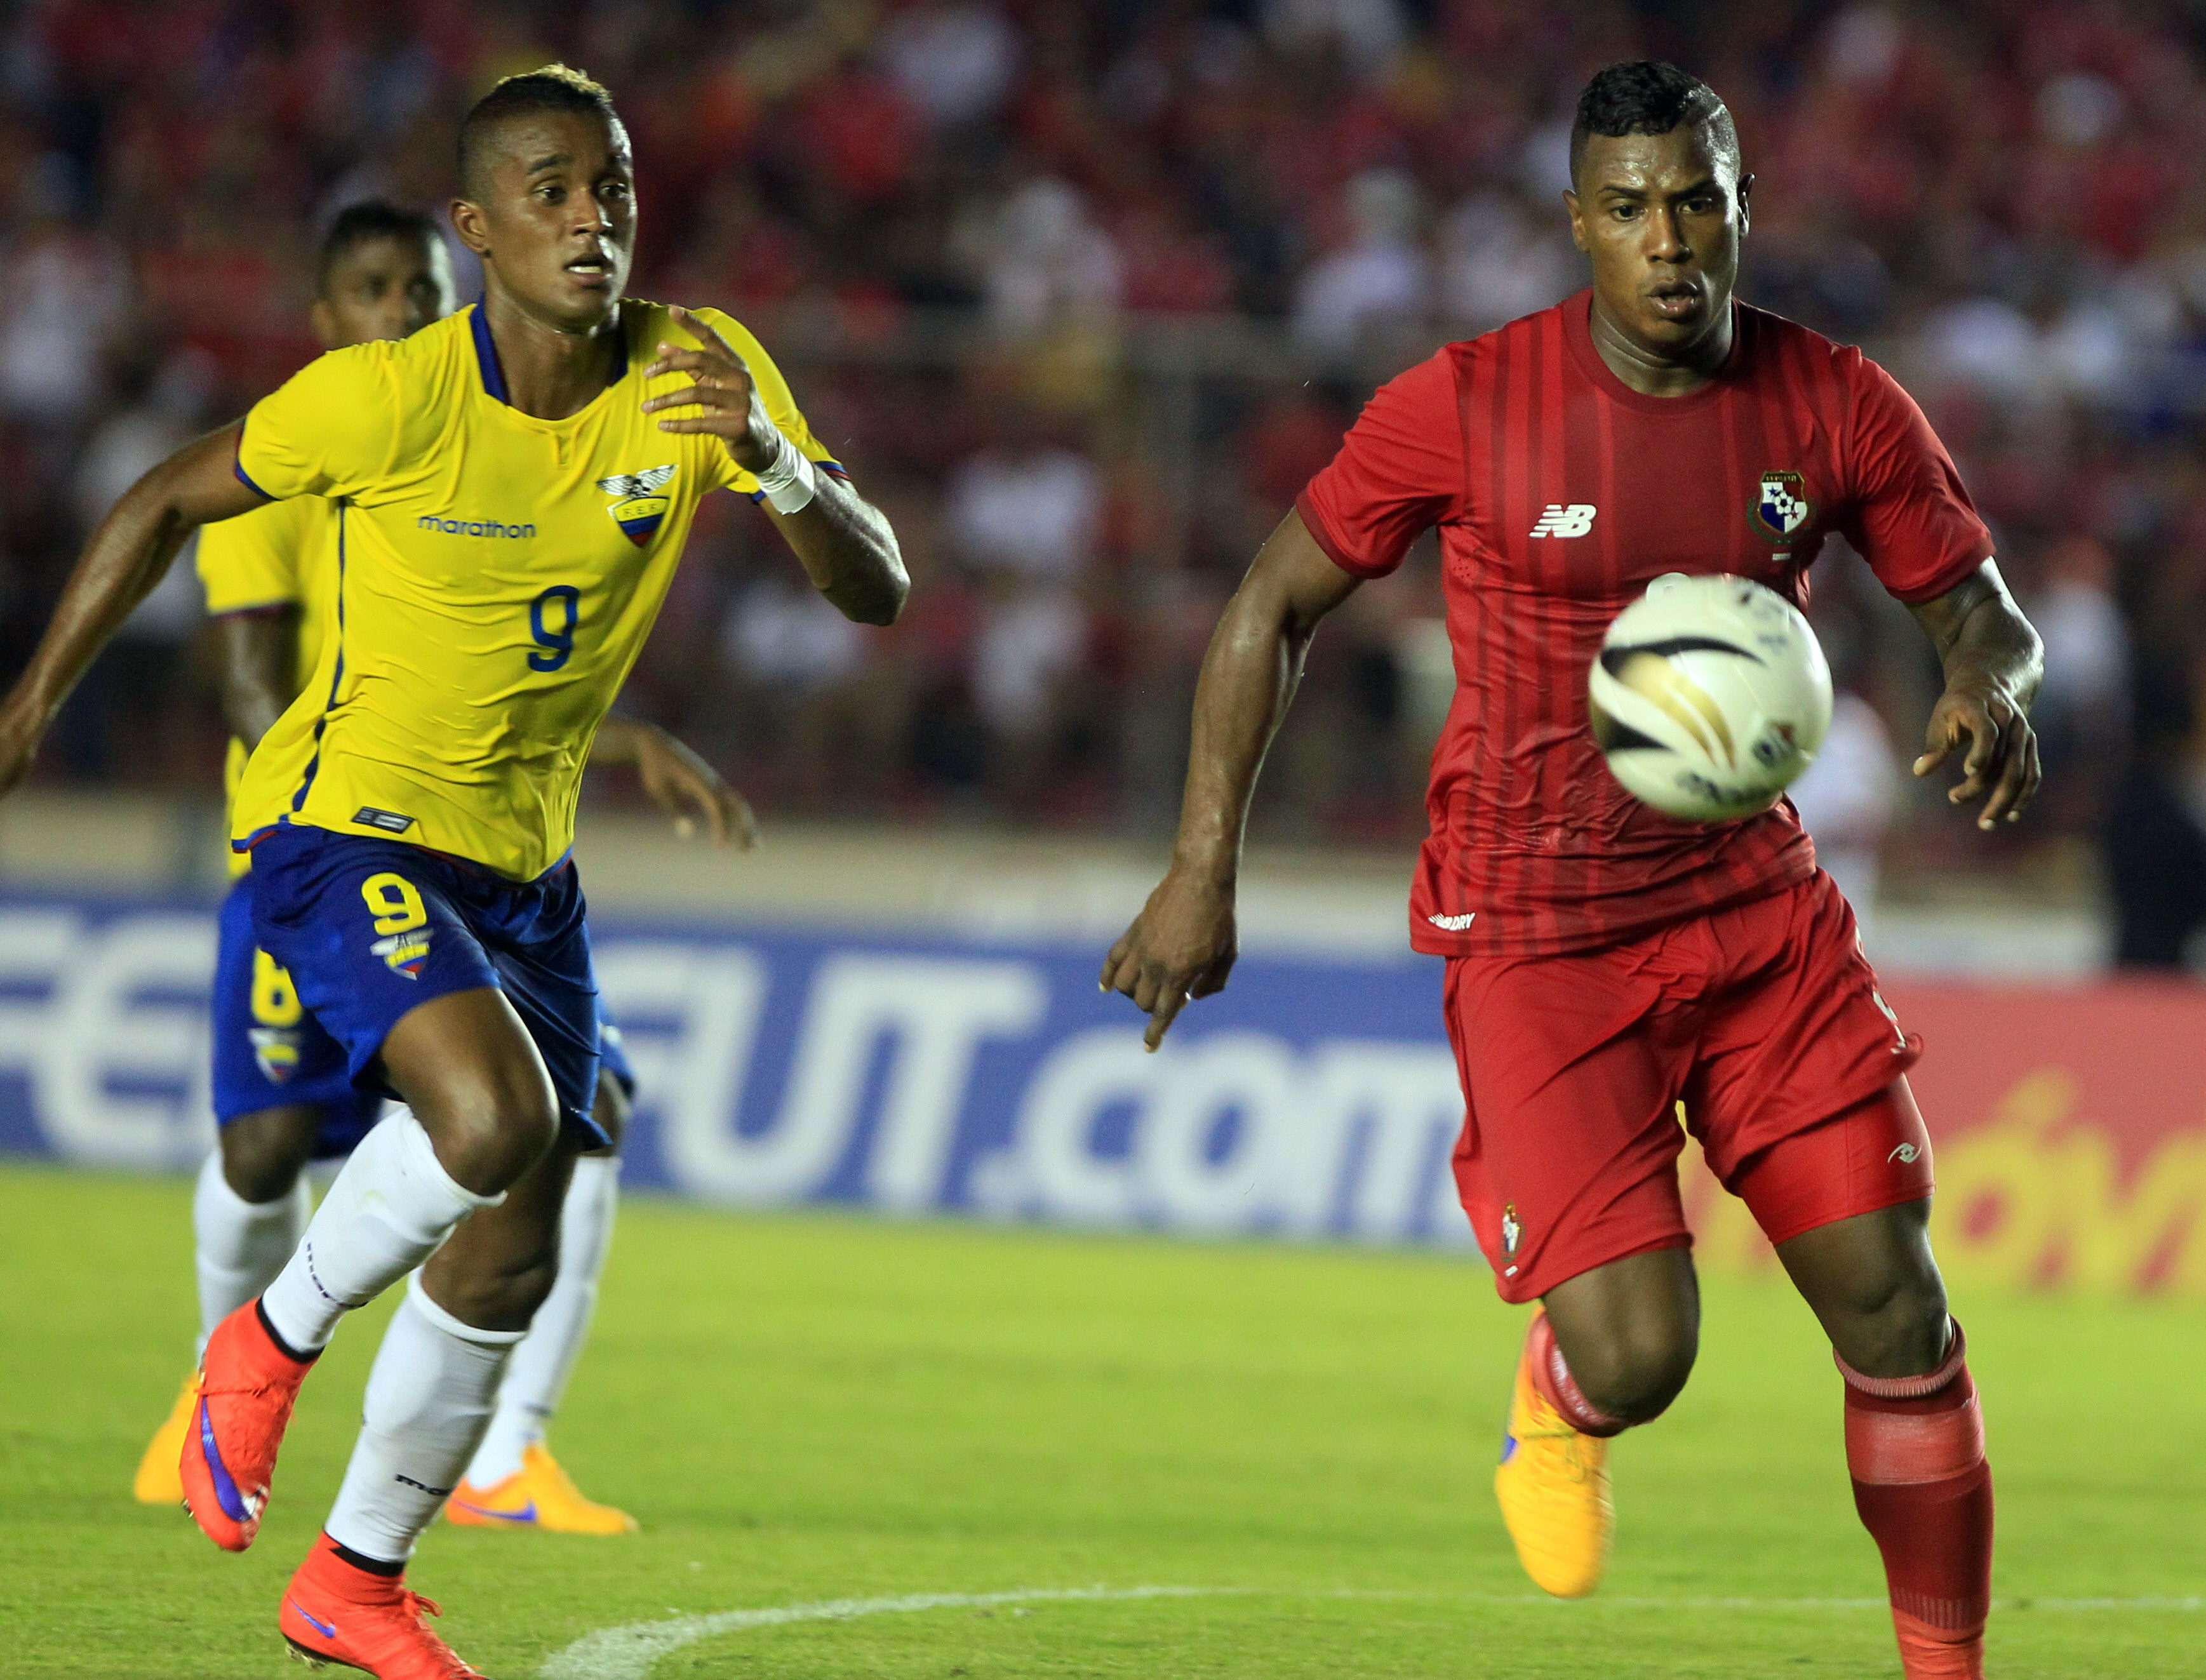 epa04782215 Panama's Harold Cummings (R) controls the ball as Ecuador's Fidel Martinez (L) vies for the ball during their friendly match in Panama City, Panama, 03 June 2015. Panama is getting ready for the CONCACAF's Gold Cup, as Ecuador is scheduled for the Copa America 2015 in Chile.  EPA/ALEJANDRO BOLIVAR